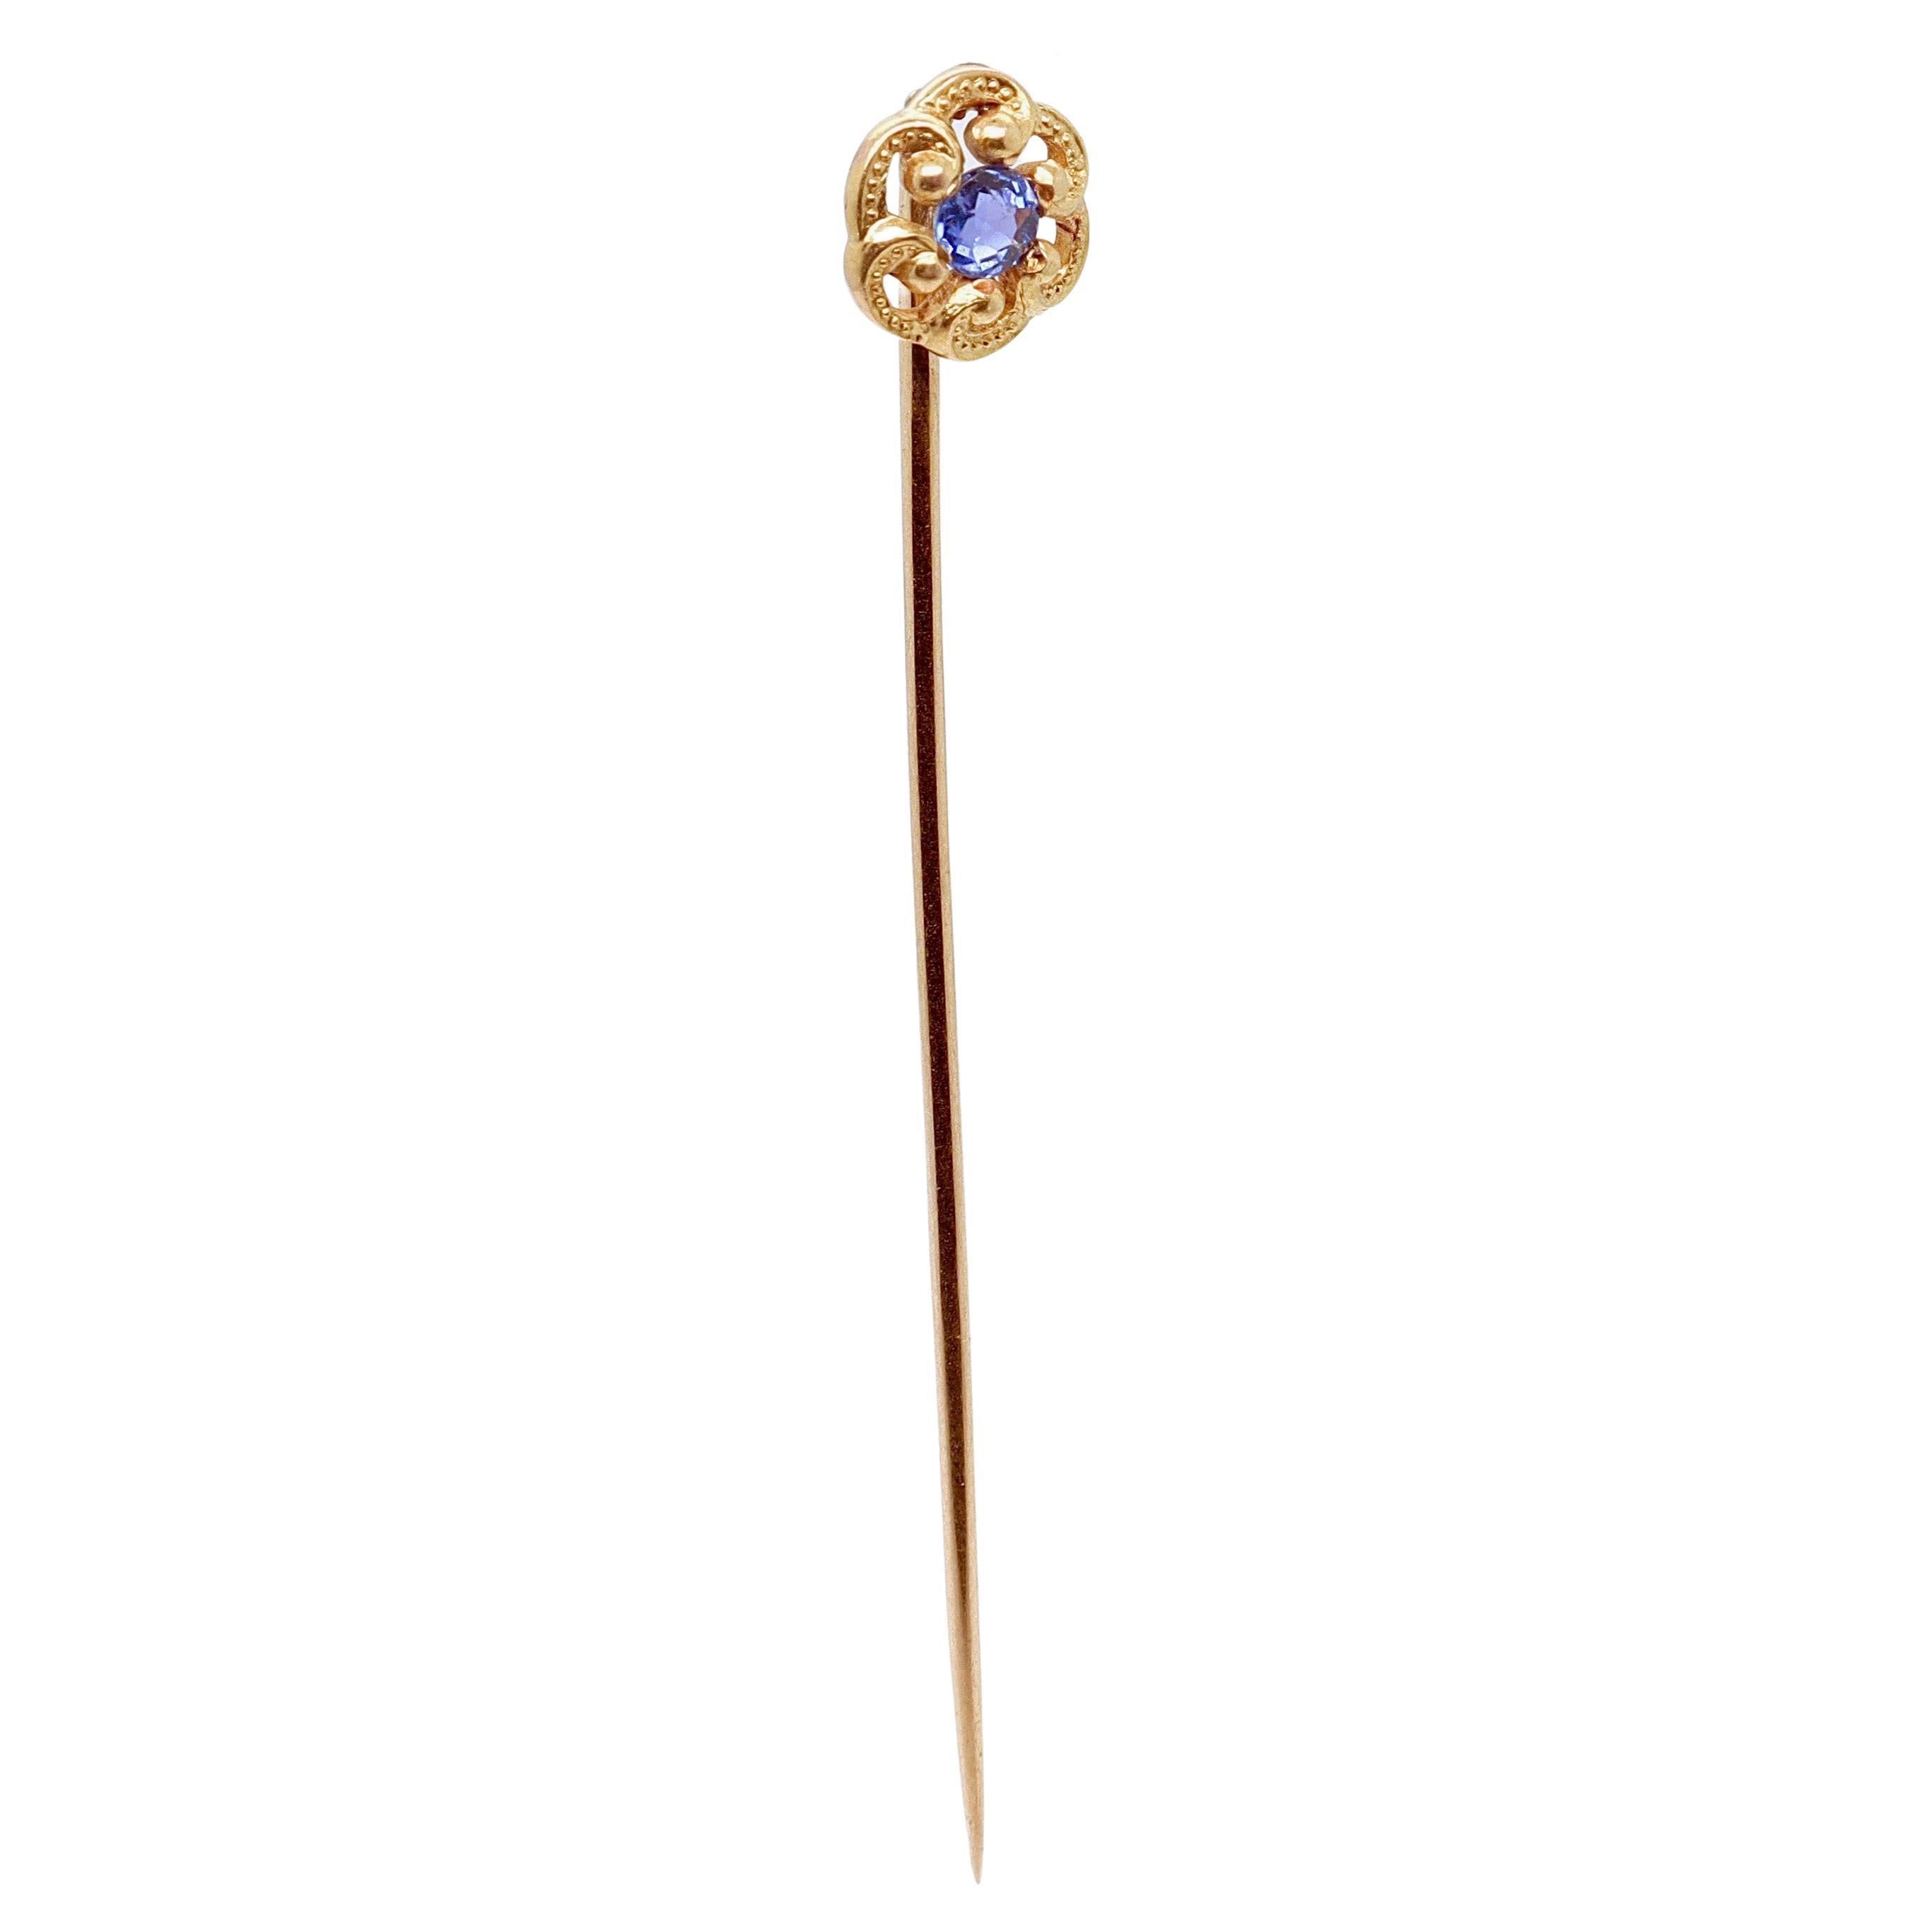 Antique Signed Edwardian Marcus & Co. 14K Gold & Sapphire Stick Pin